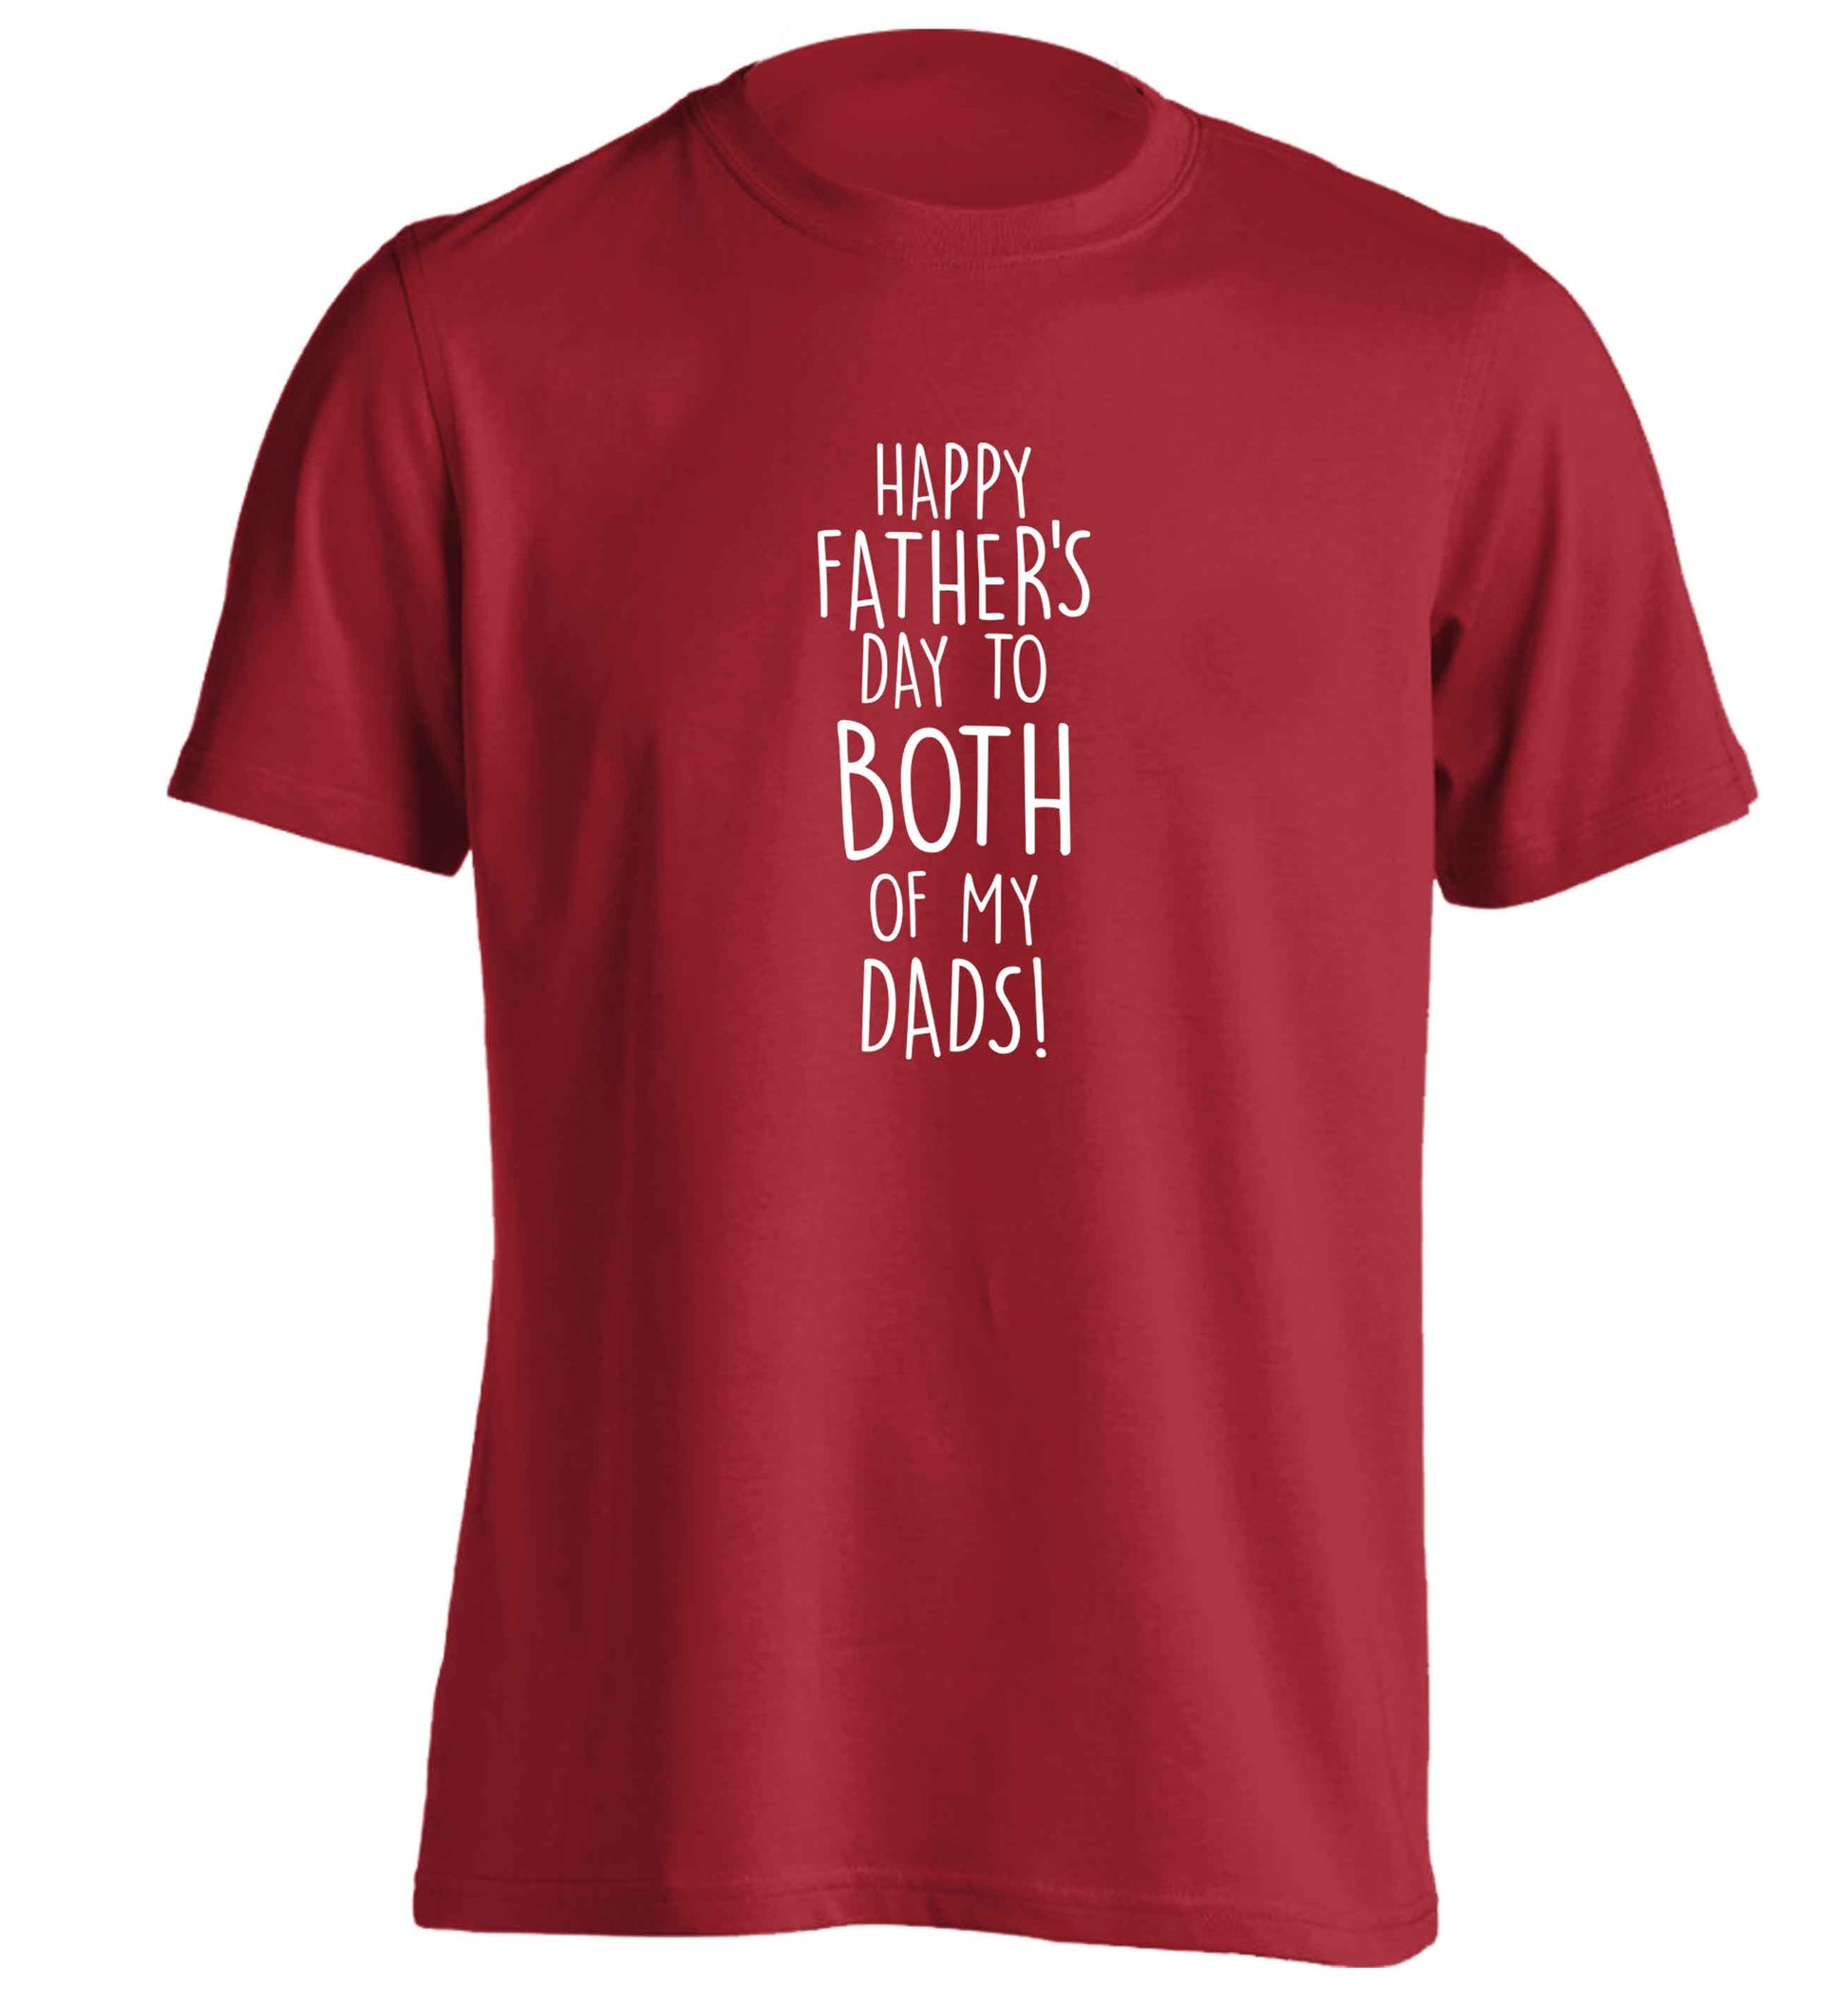 Happy Father's day to both of my dads adults unisex red Tshirt 2XL